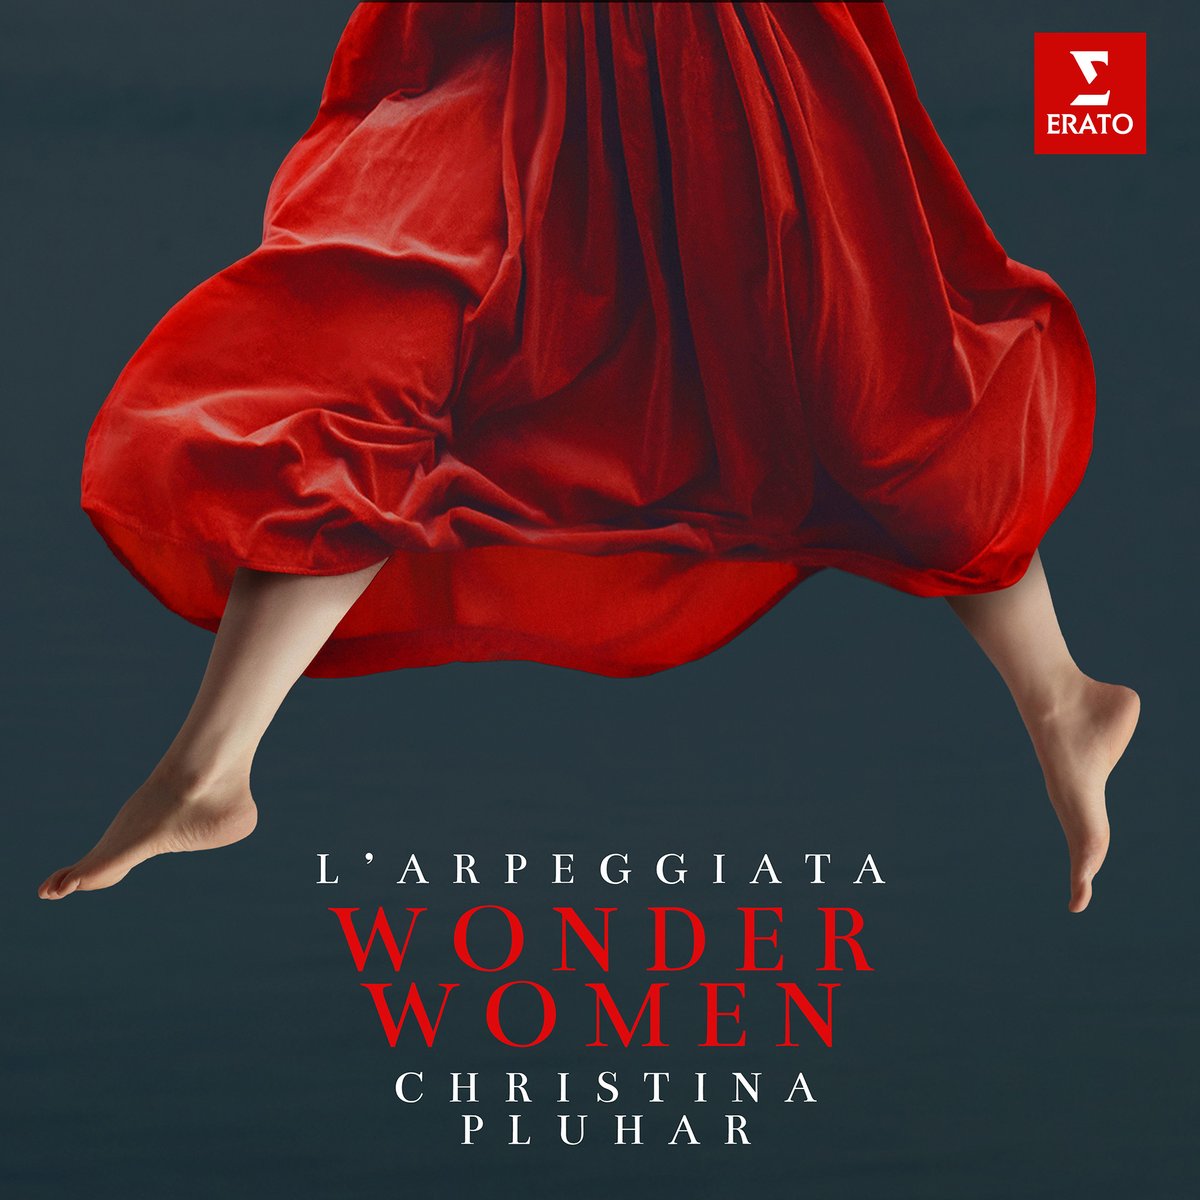 RELEASED TODAY: Christina Pluhar and @larpeggiata's multi-faceted album ‘Wonder Women’ celebrating women from 17th century Latin America and Italy. In ‘La Canzone di Cecilia’ -a folk song arranged by Pluhar- the tragic tale of two lovers' fate is told. 🎧 w.lnk.to/wonderwTW